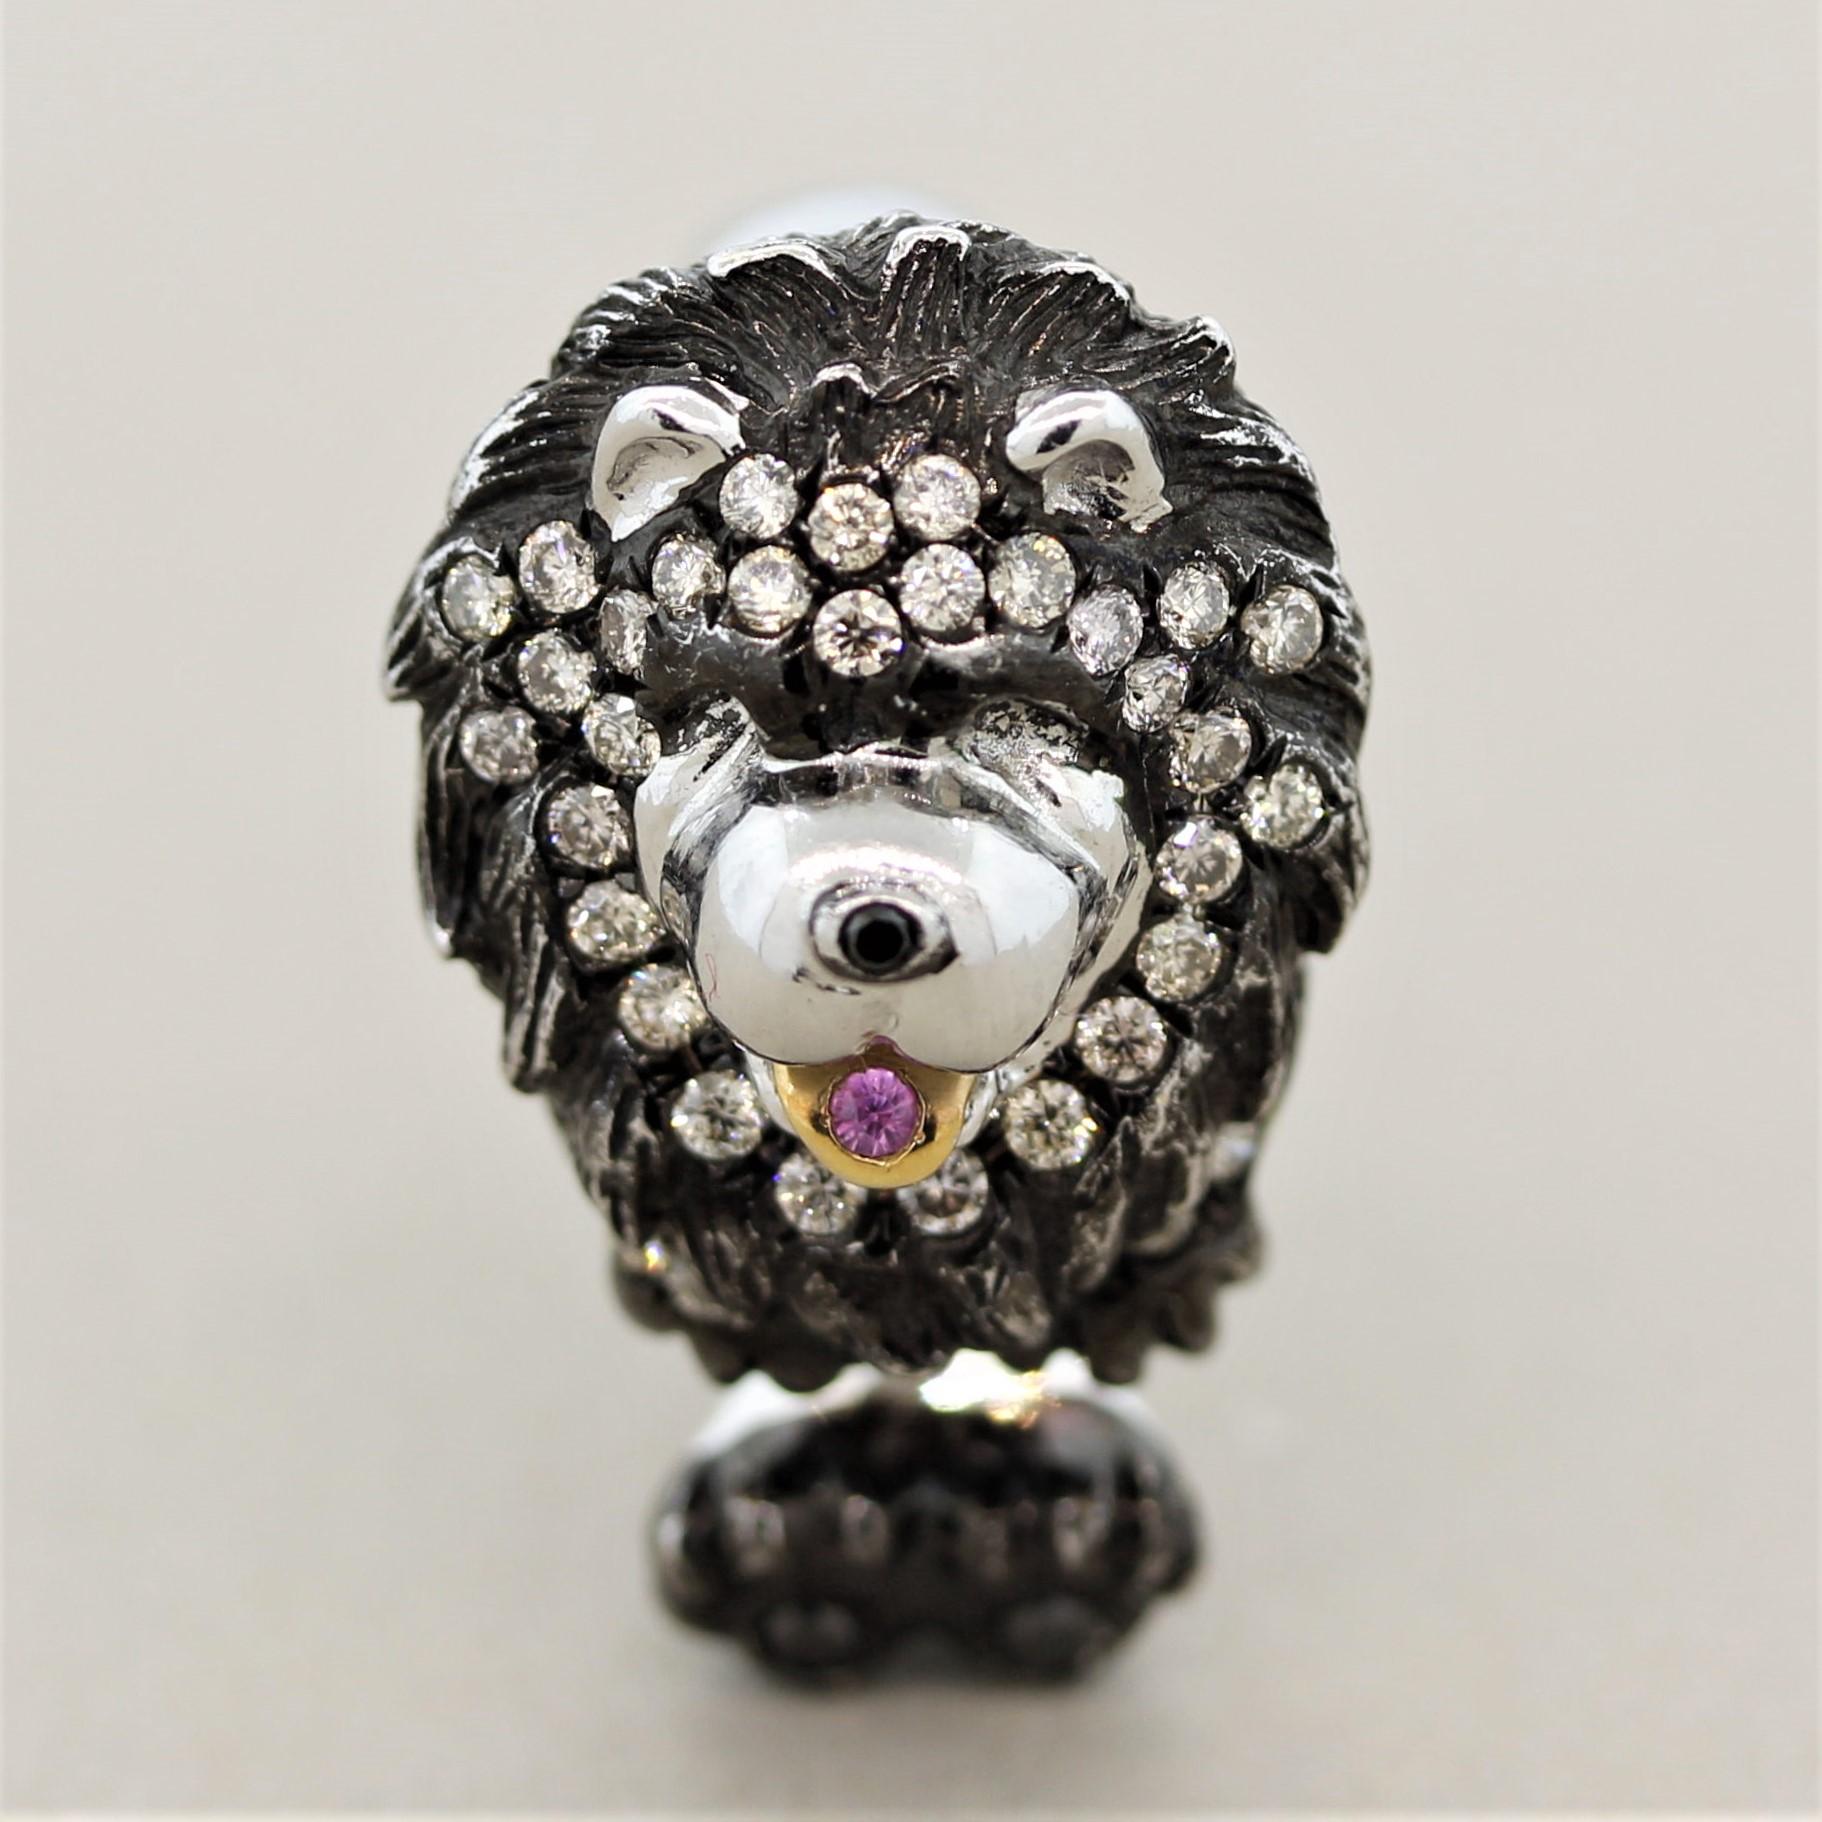 A sweet baby! This puppy dog features 0.52 carats of round brilliant cut diamonds set across its mane and paws. There is a single round shaped pink sapphire set in its mouth as its tongue. It is made in 18k white gold with a rhodium finish over the